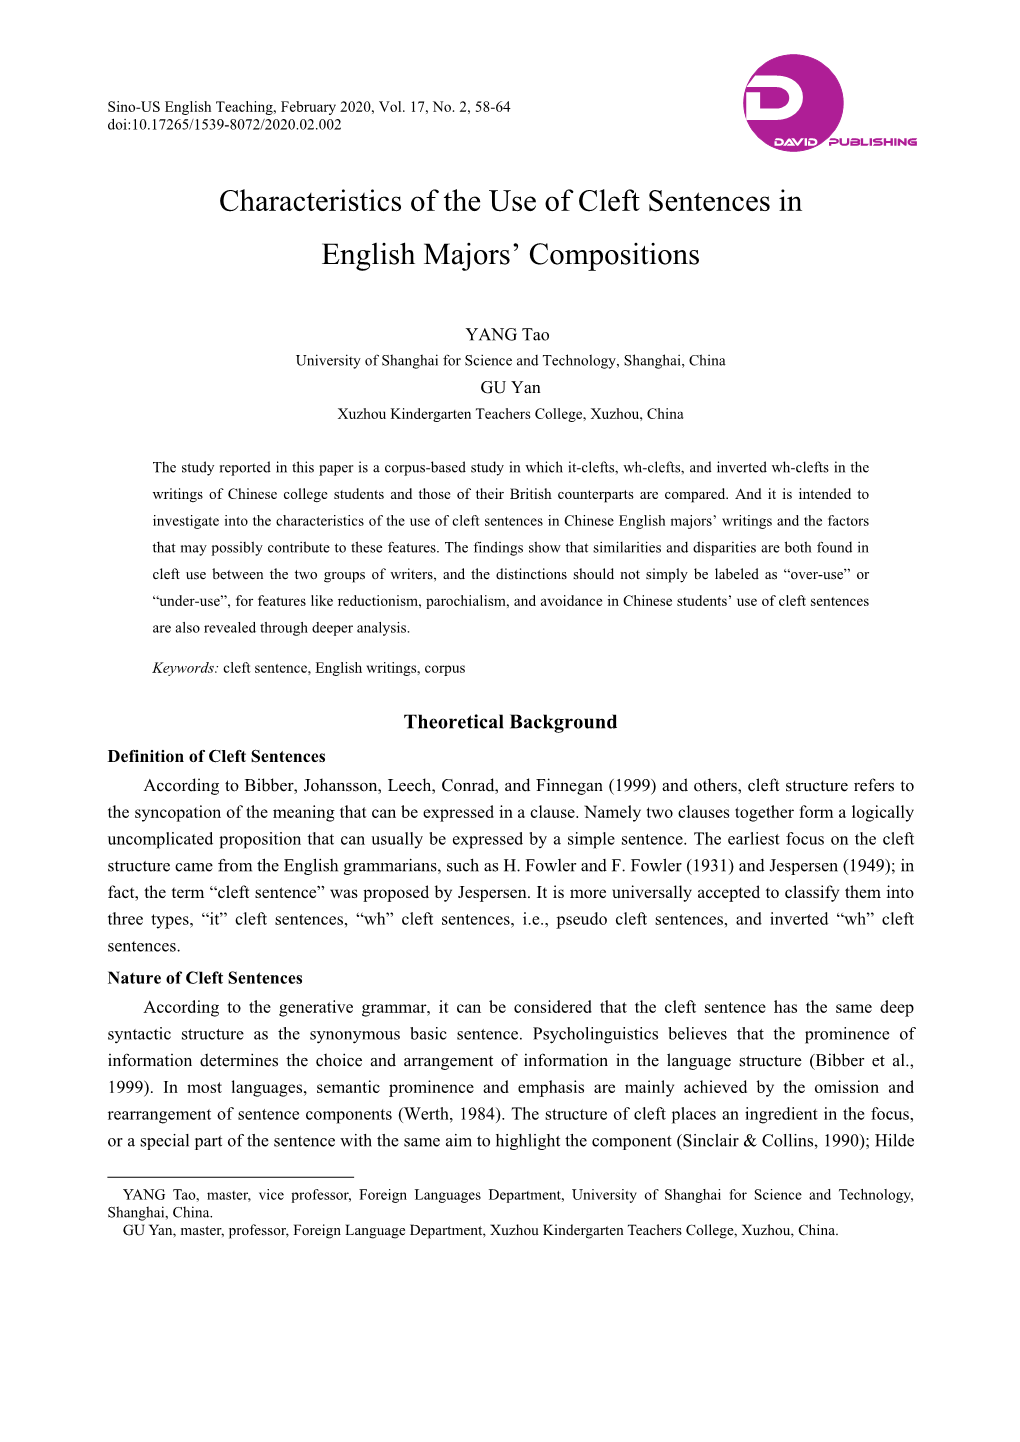 Characteristics of the Use of Cleft Sentences in English Majors' Compositions